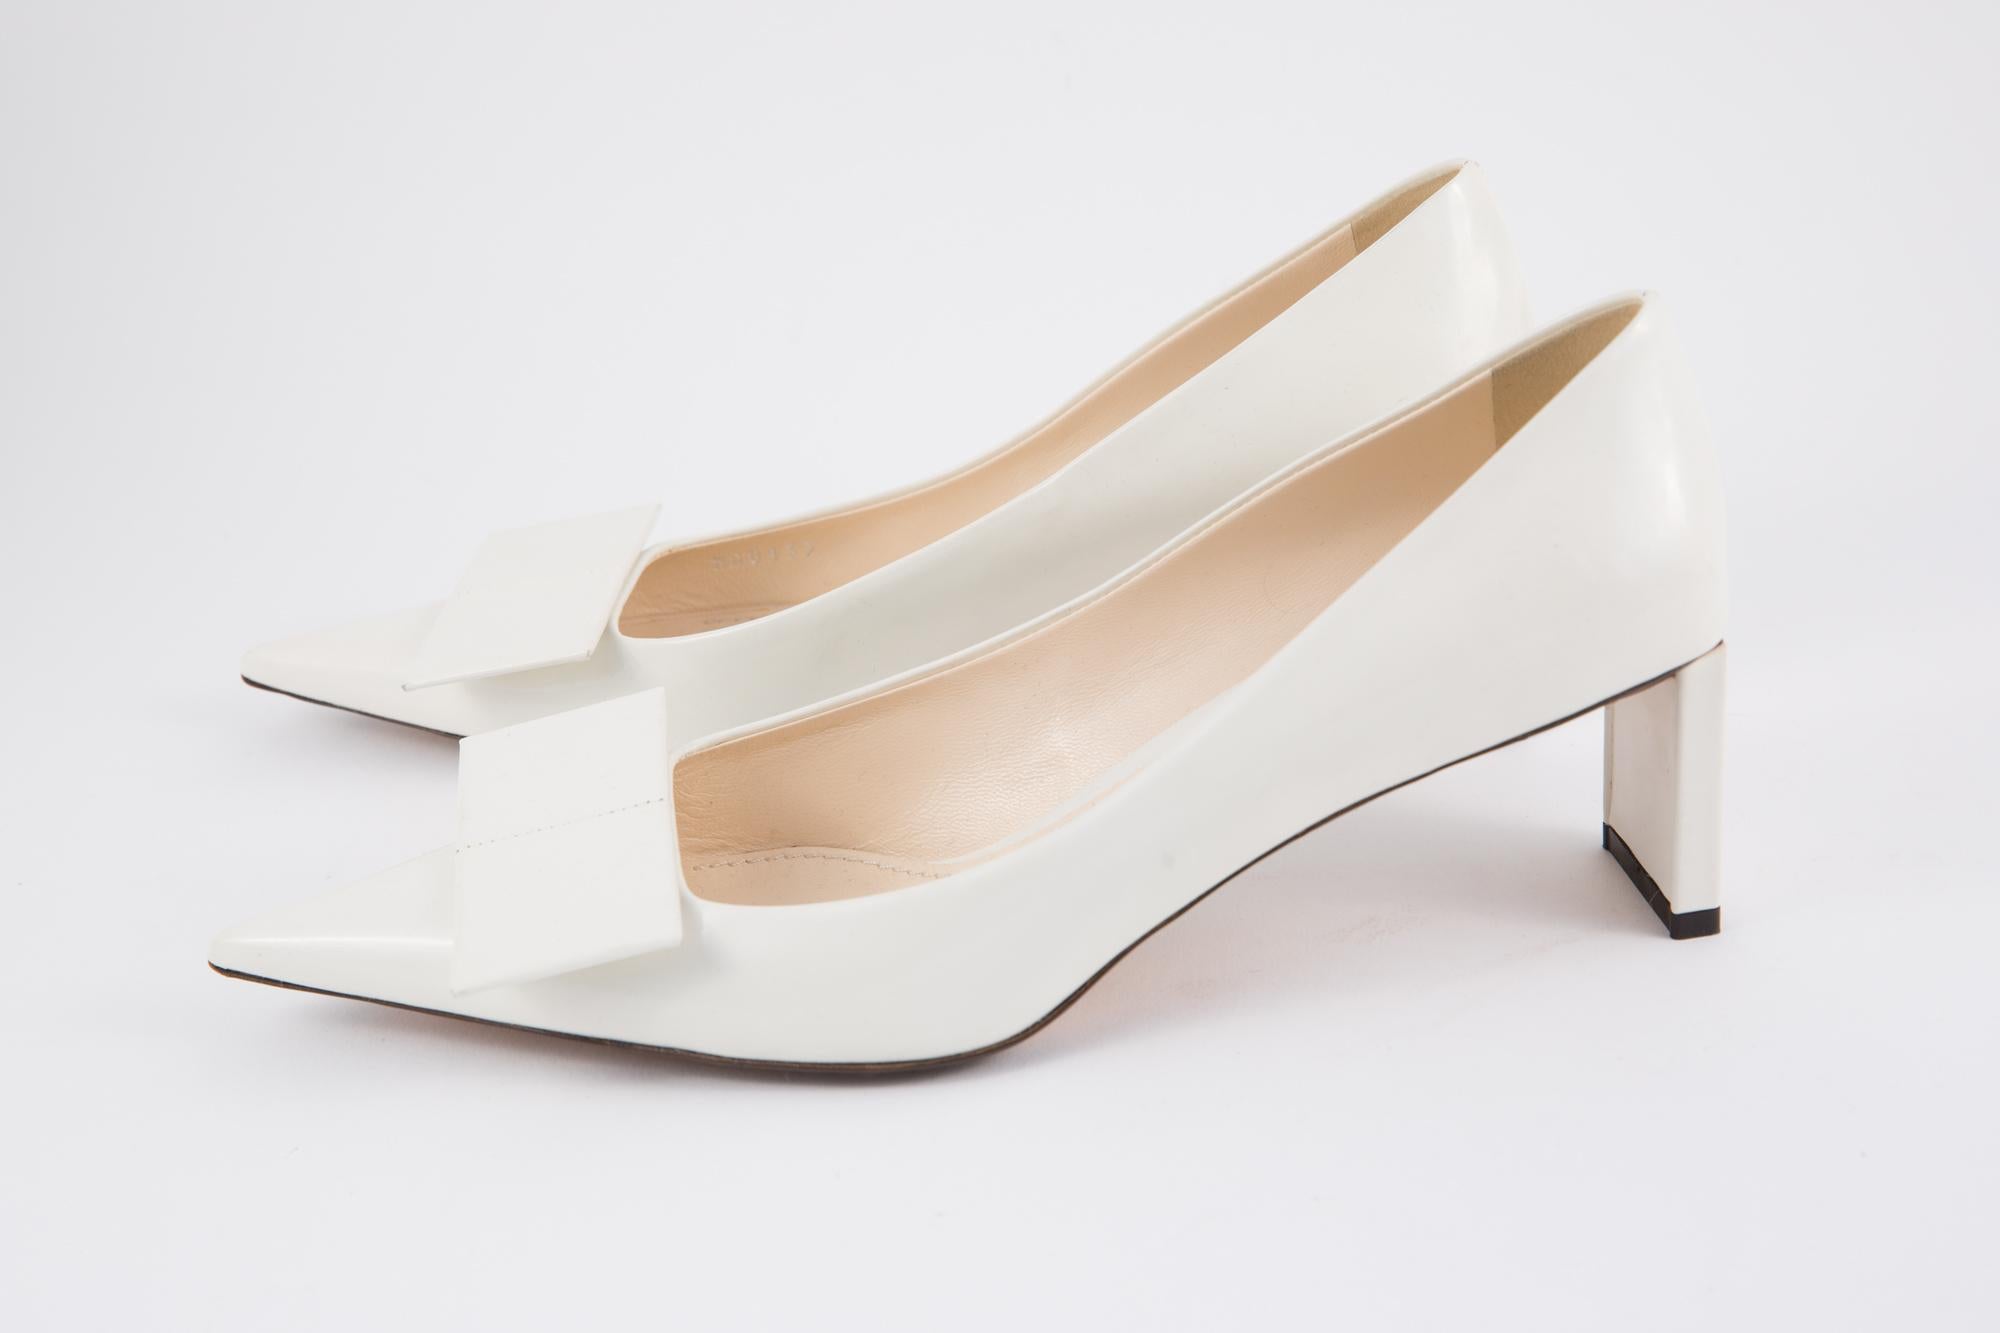 Louis Vuitton white leather pumps featuring a pointed toe, a flat knot on top and a square heel 2.3in. (6cm) X 0.39in (1cm)  
In Excellent vintage condition. Delivered in our Dressing Factory Dust Bag.
Shoes Size: 39fr/ 7.5 US/ 6UK
We guarantee you